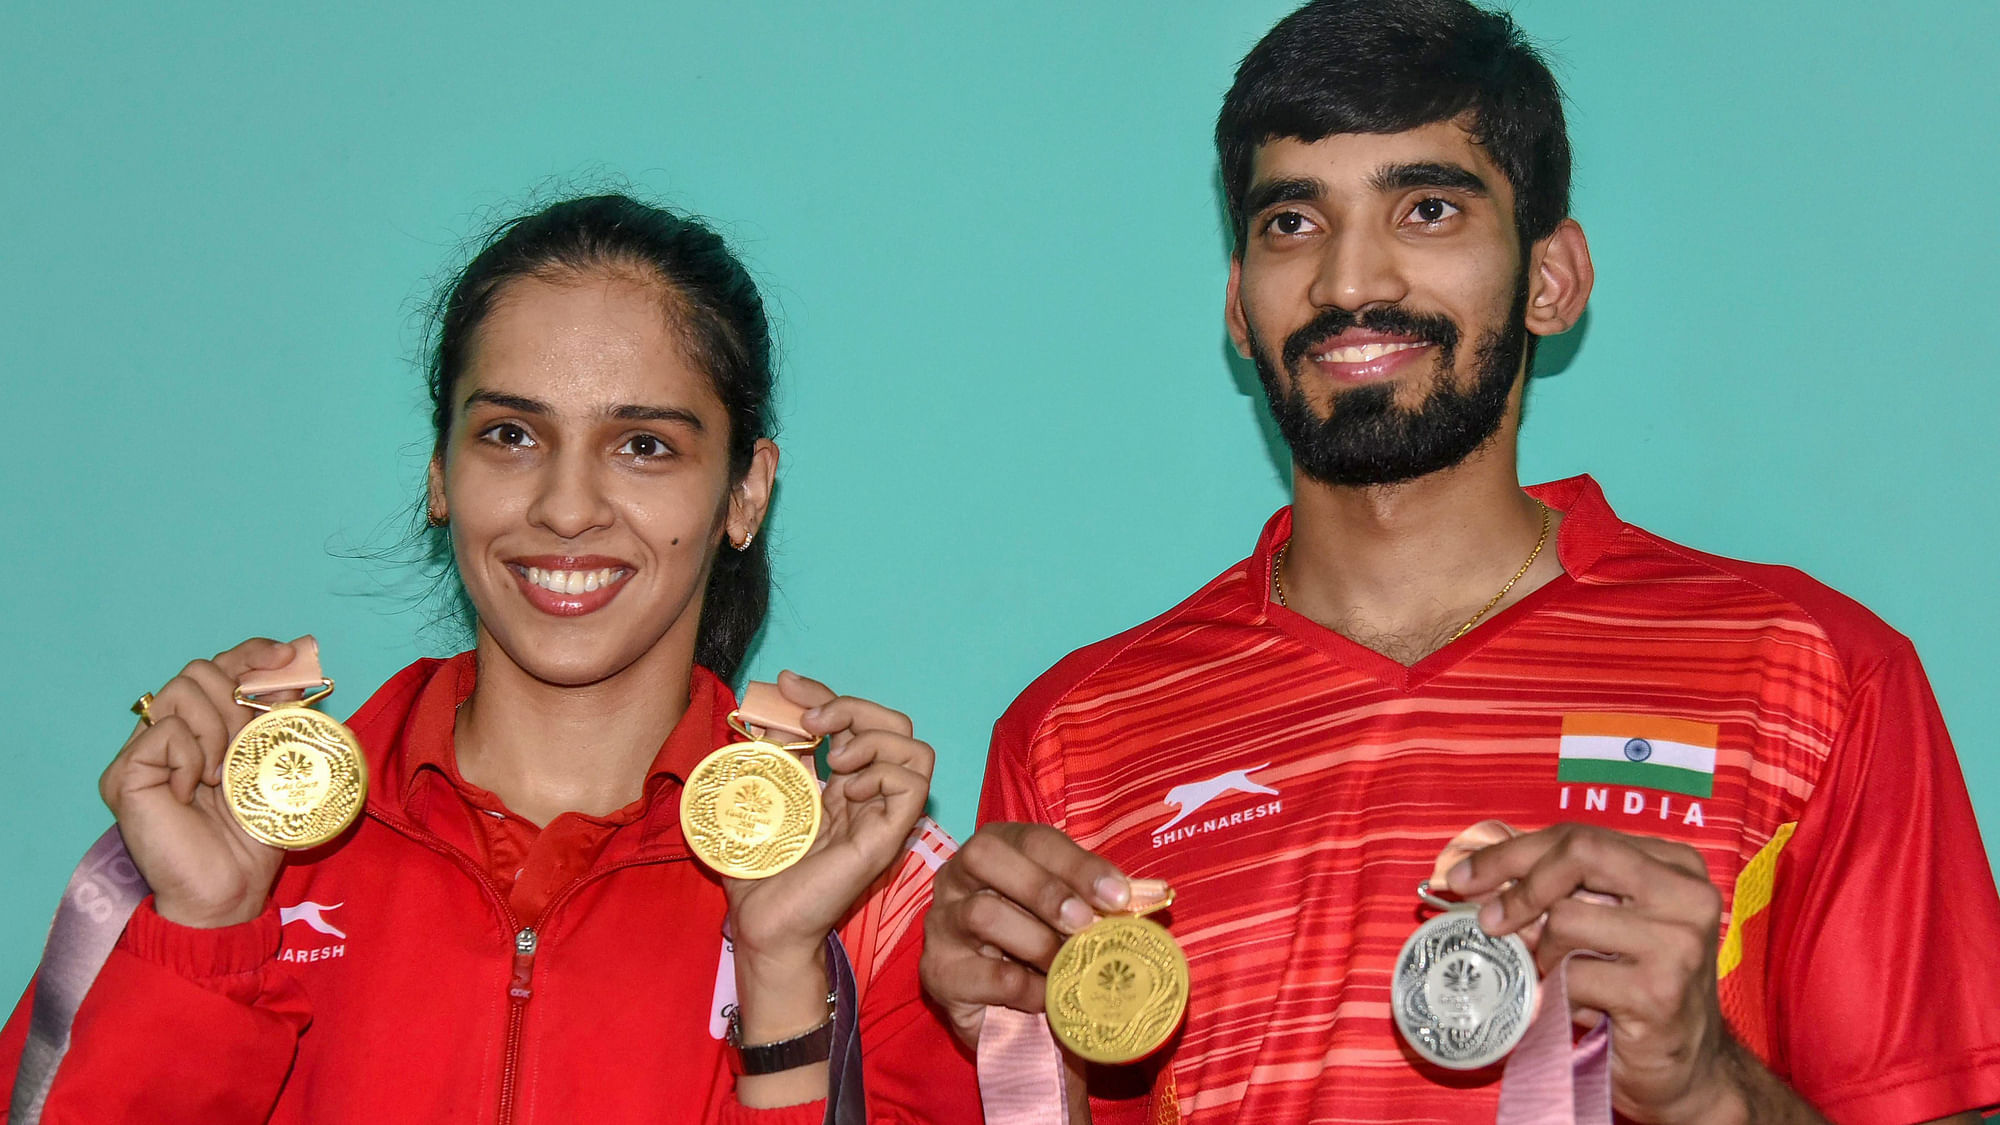 Saina Nehwal is in hot form having won the gold medal at the 2018 Commonwealth Games. Kidambi Srikanth in the top seed in the men’s draw.